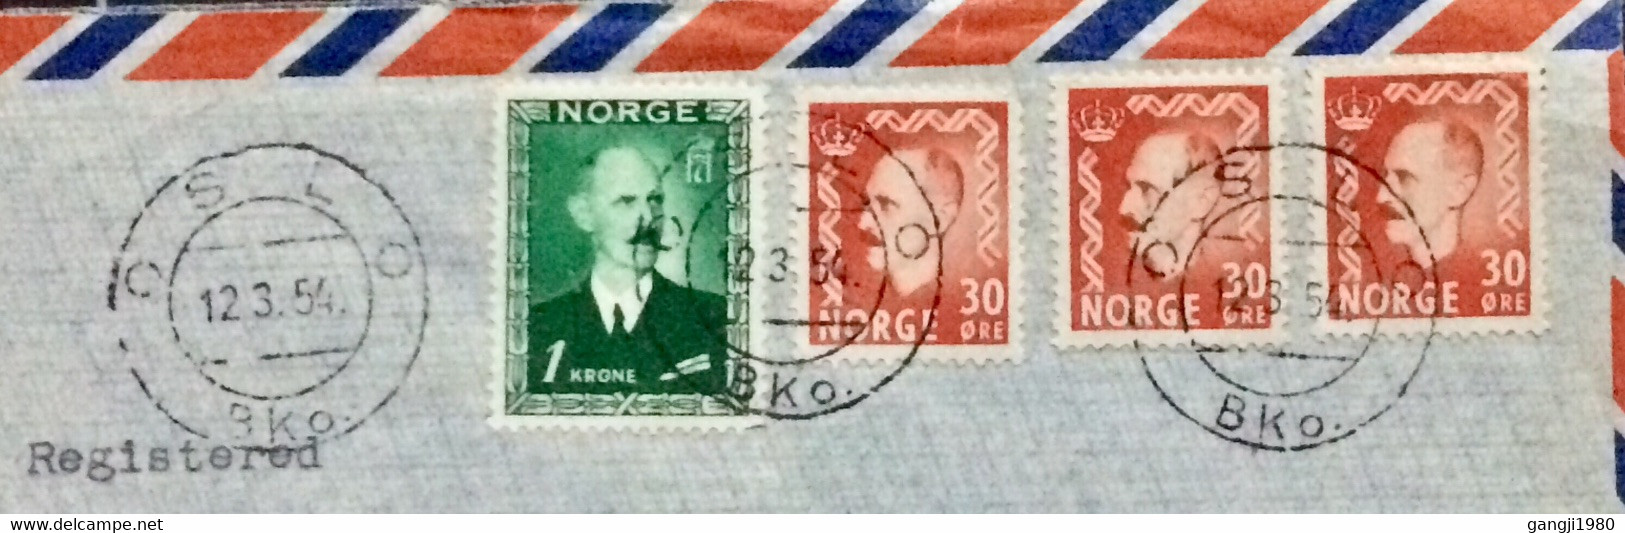 NORWAY 1954, PRIVATE COVER “EIDE” FIRM, USED TO USA,KING HARKON 4 STAMPS, REGISTER OSLO & DETROIT CITY CANCEL. - Covers & Documents